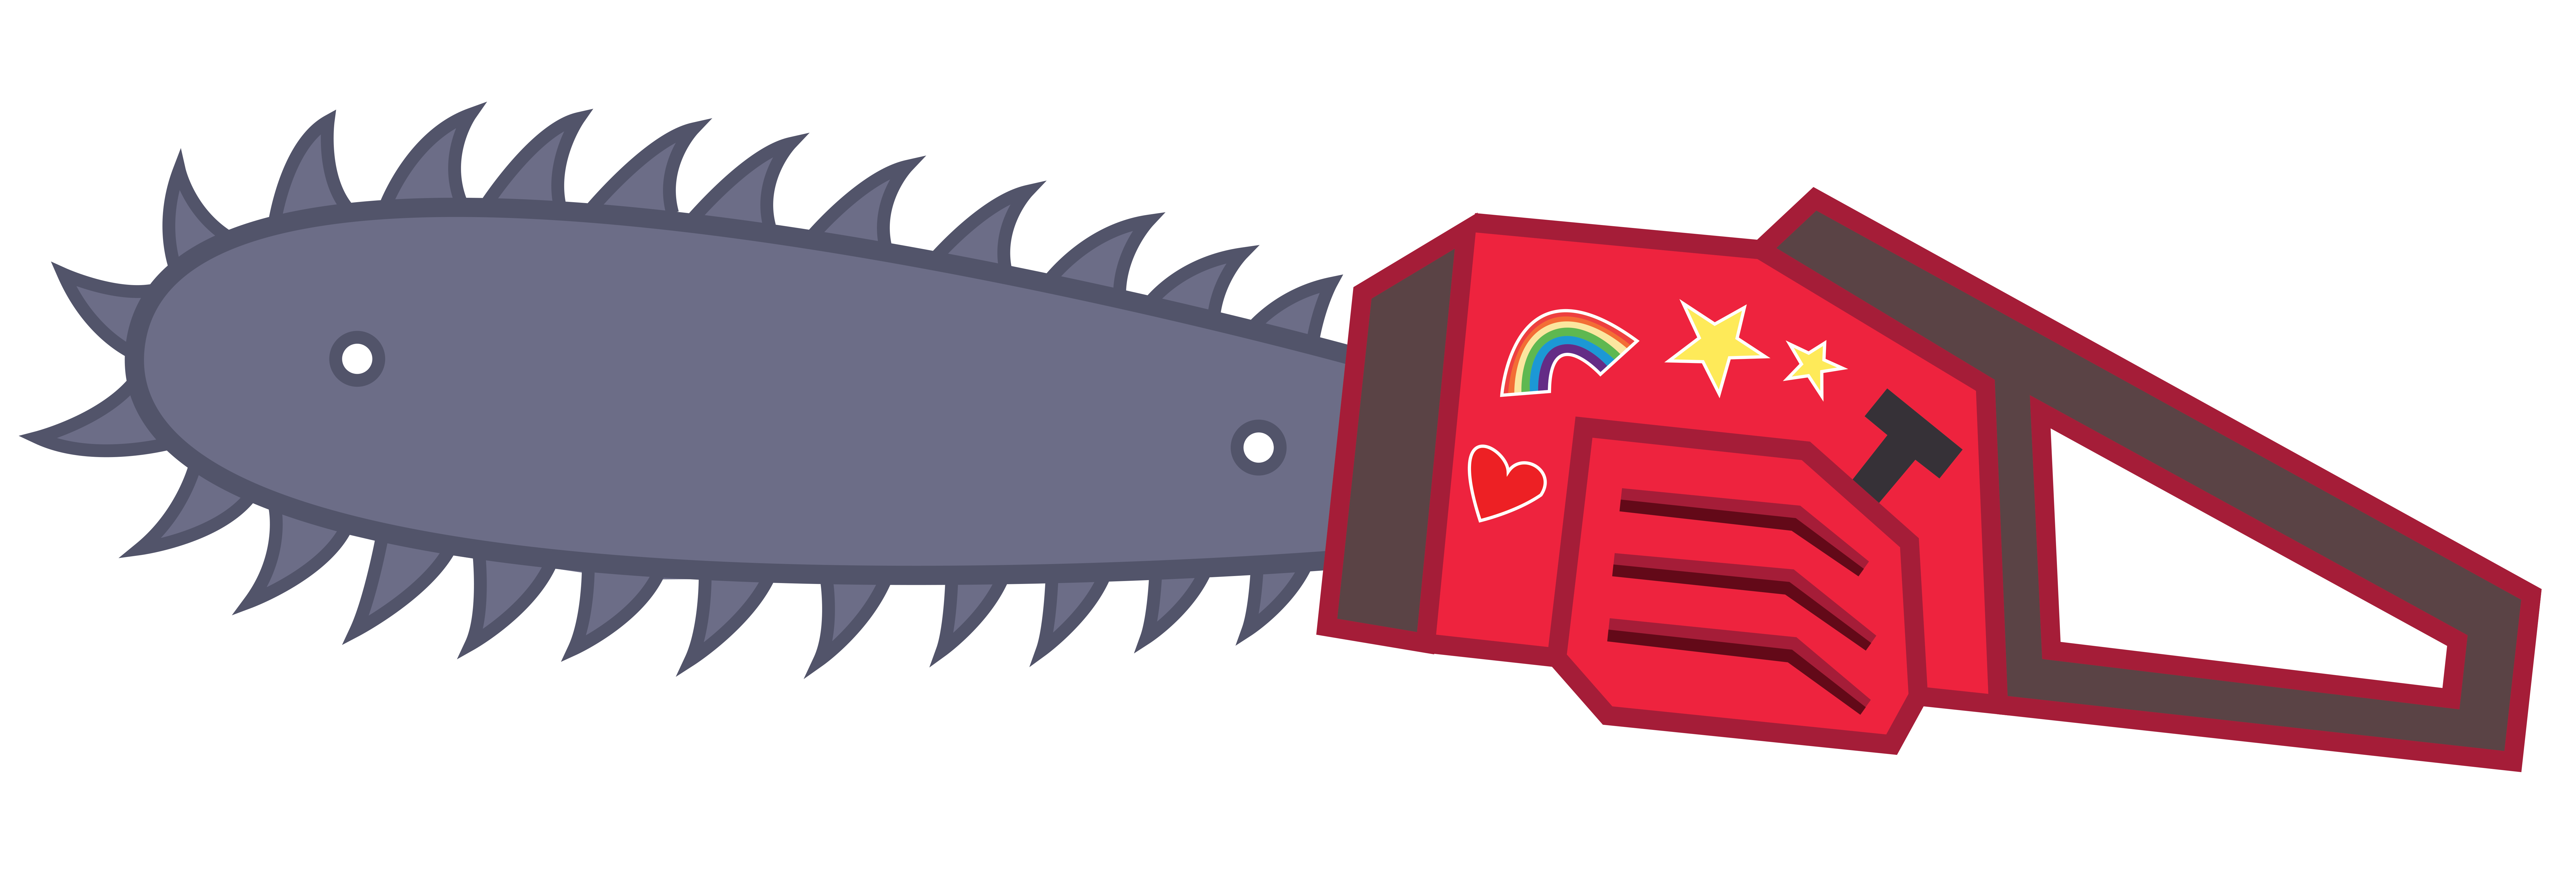 The Chainsaw From Cupcakes Hd By Th3Anim8Er On Clipart Library - Saw, Transparent background PNG HD thumbnail